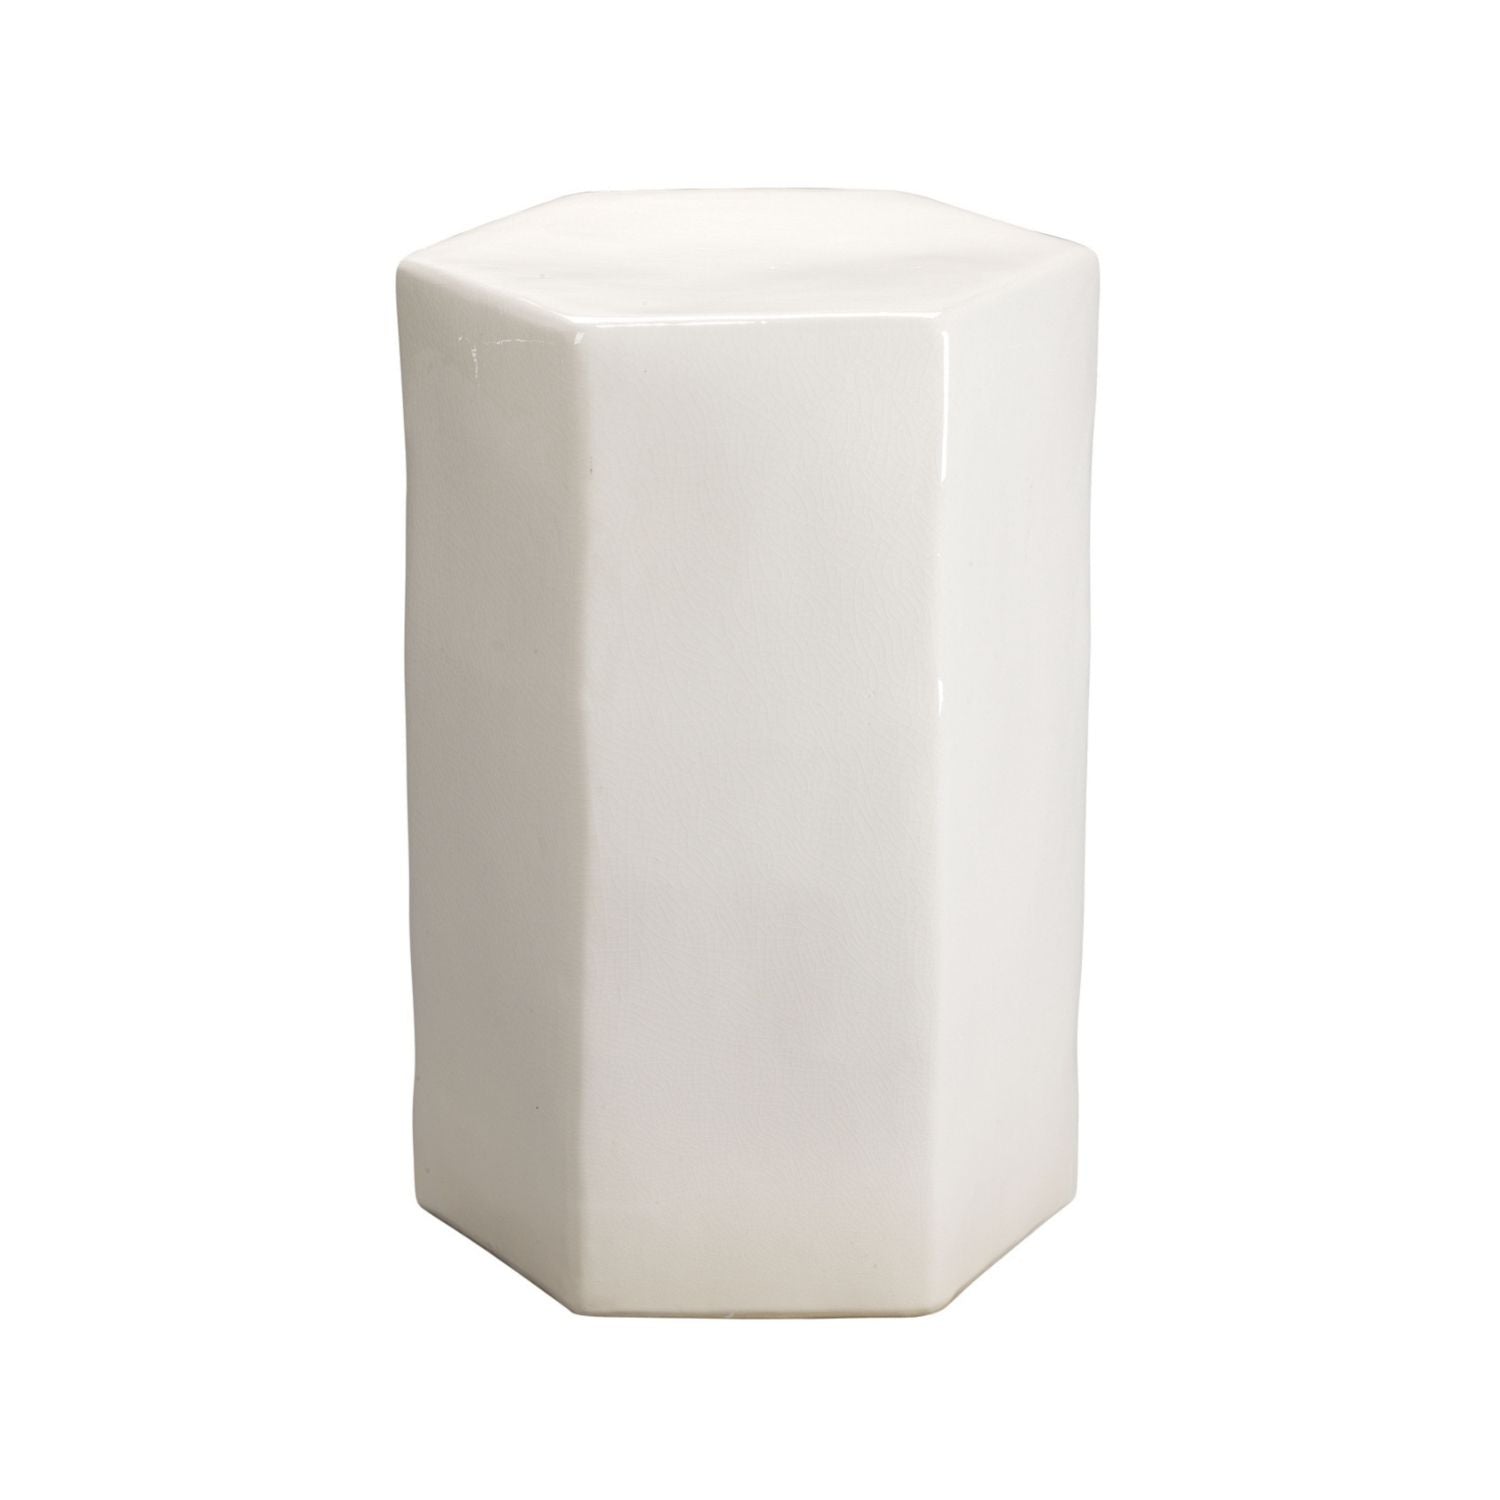 Porto Ceramic Indoor/Outdoor Side Table-Large, White